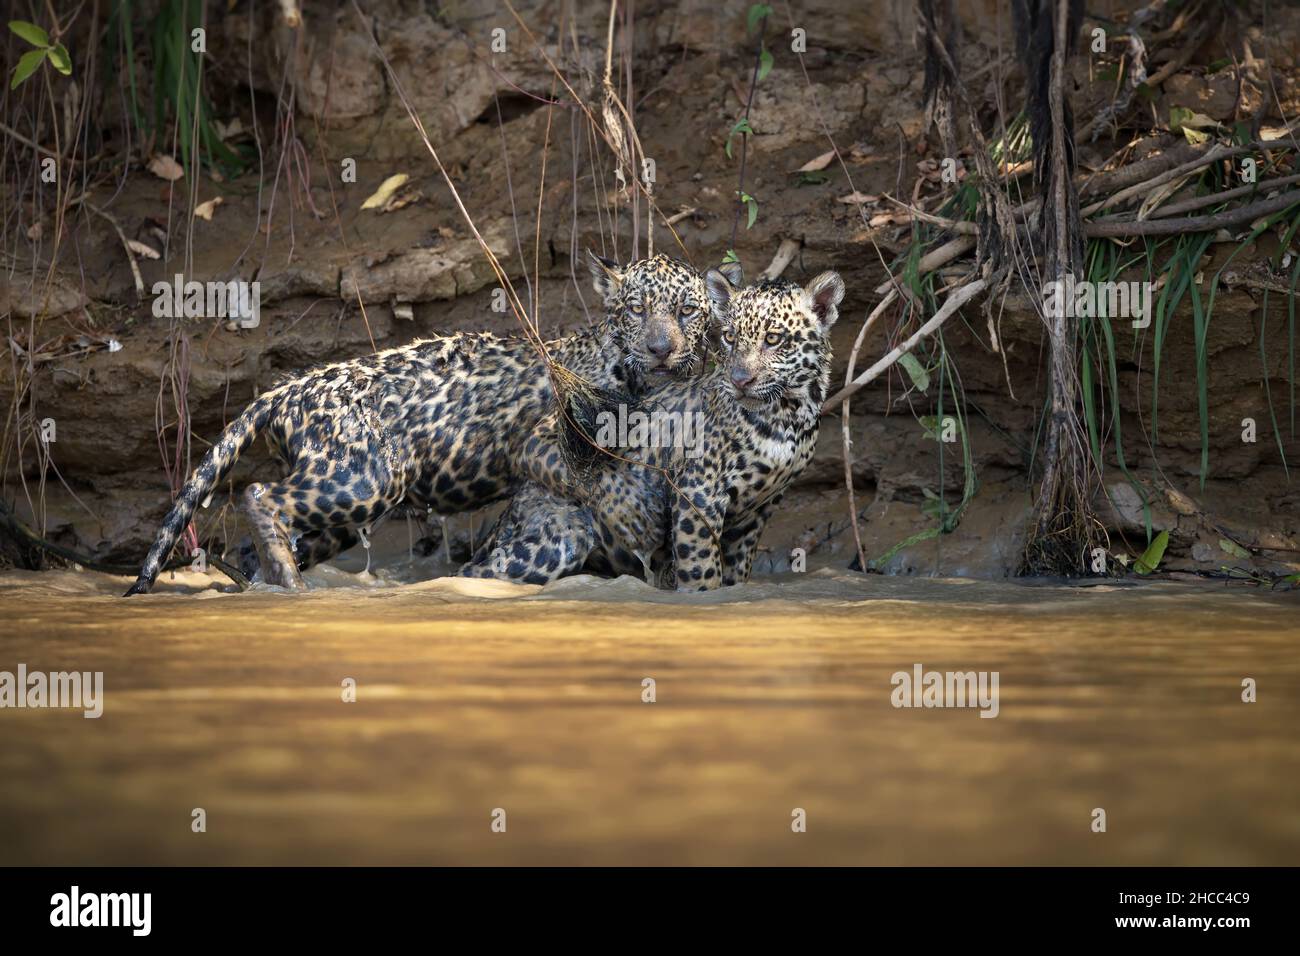 Spotted jaguars mating on the shore of a pond in Pantanal, Brazil Stock Photo